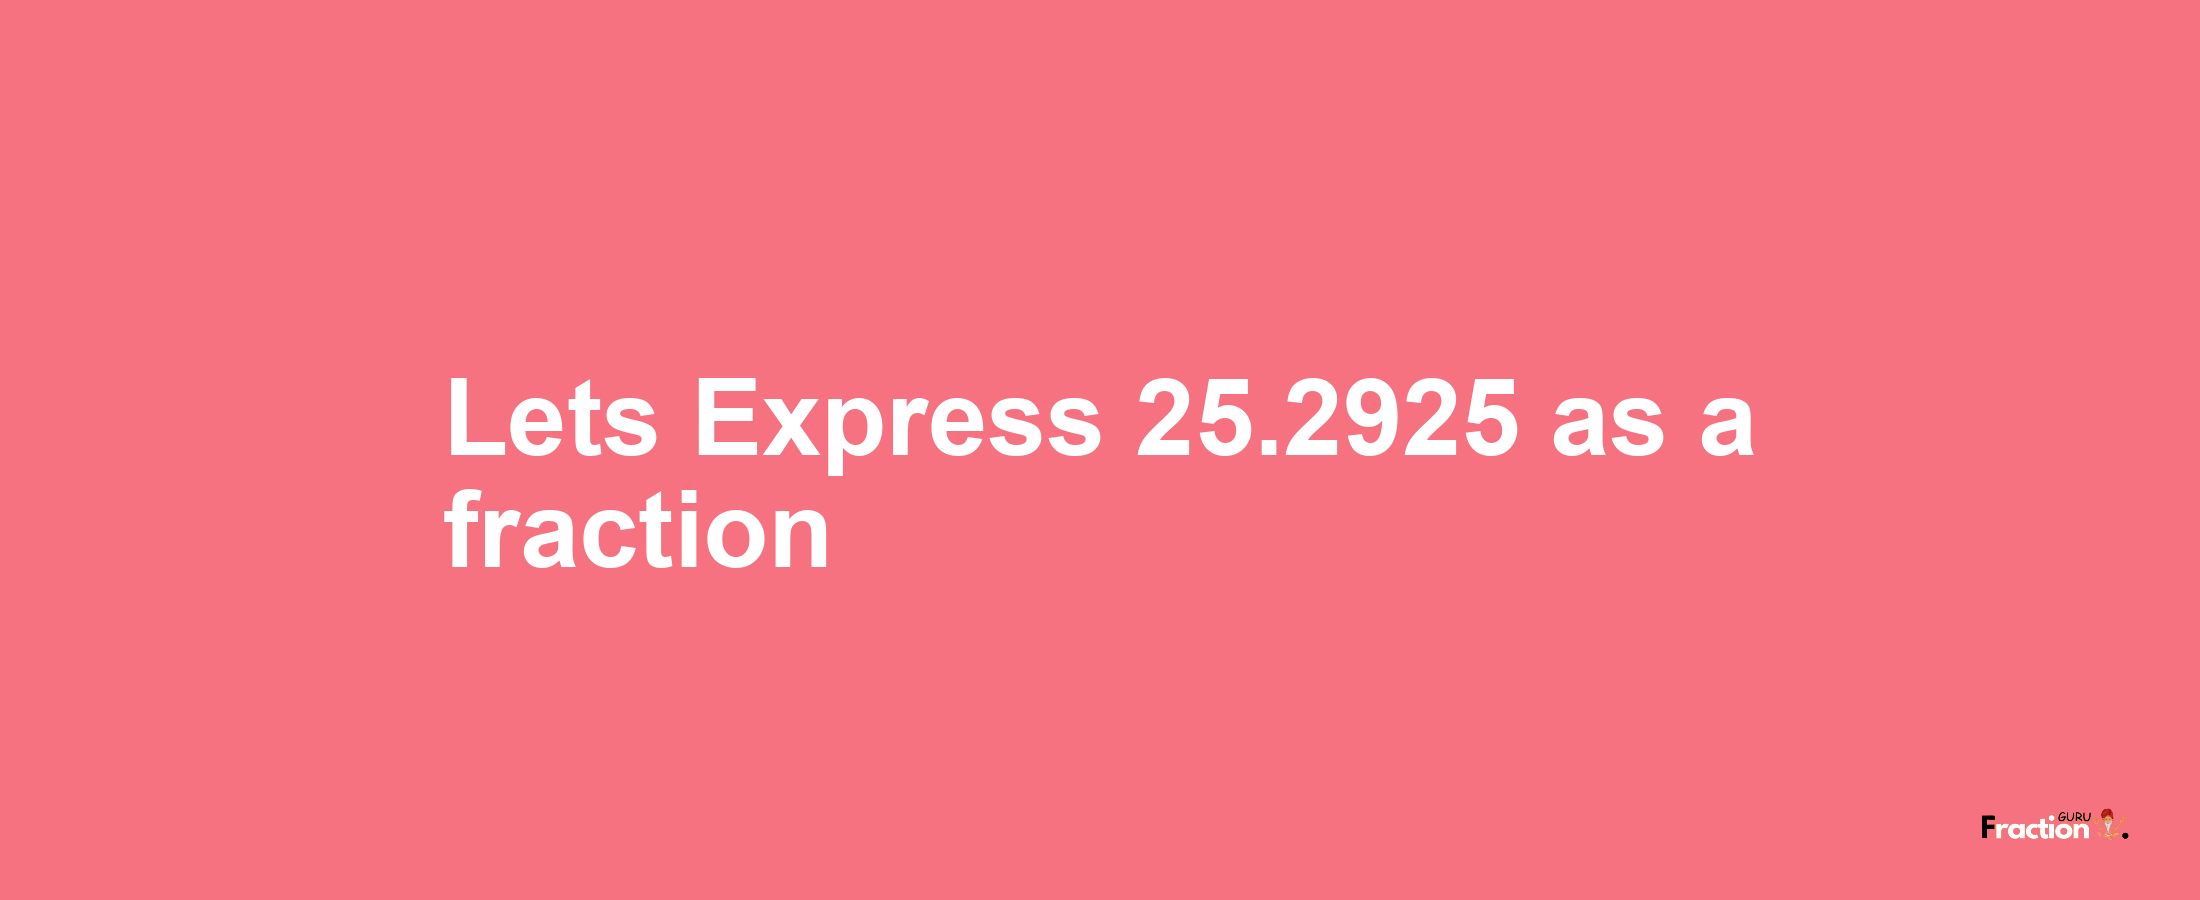 Lets Express 25.2925 as afraction